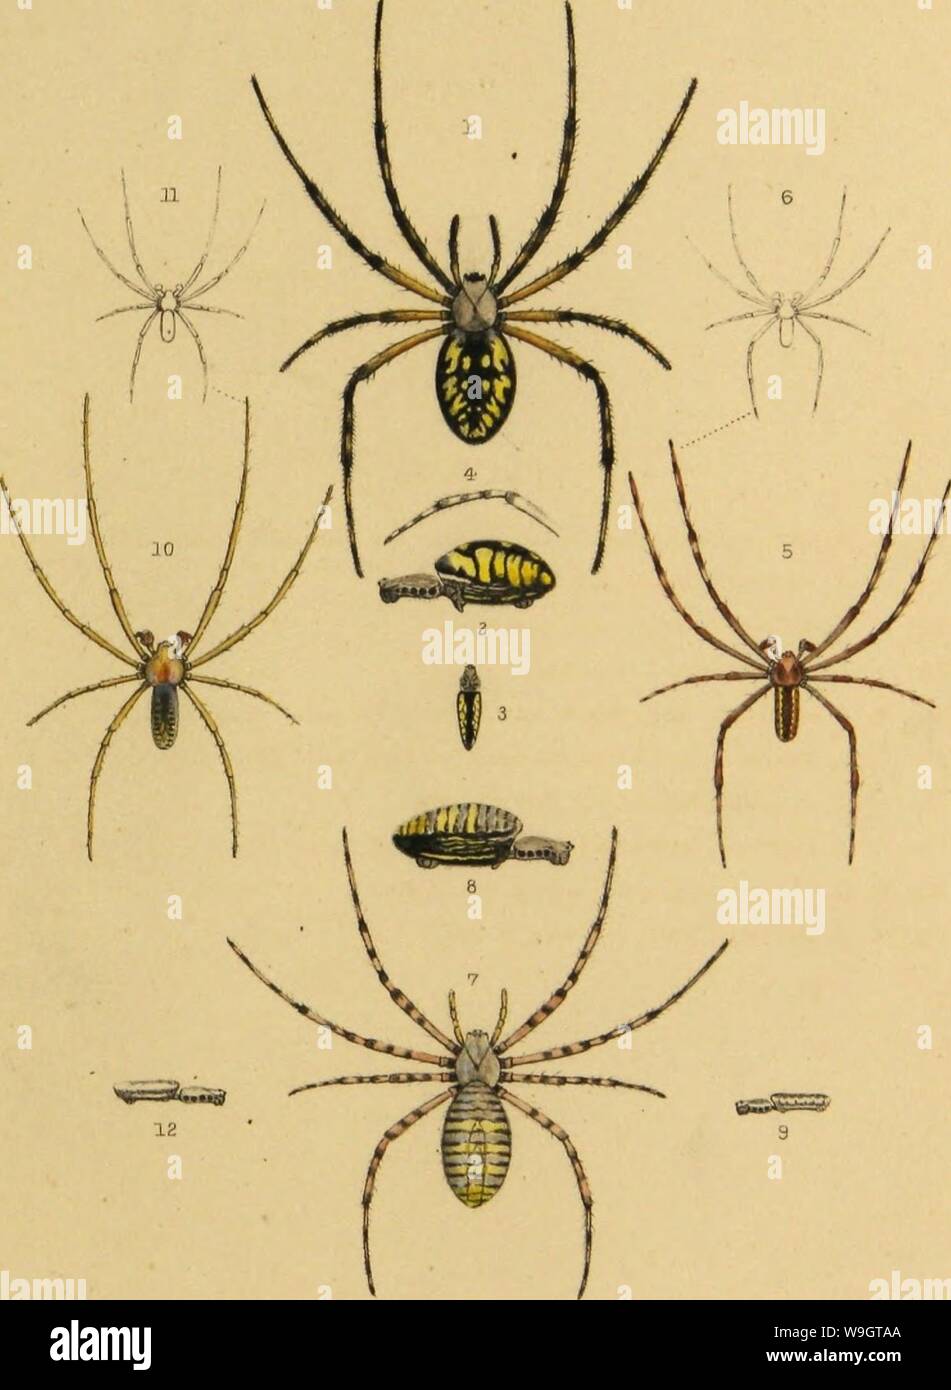 Archive image from page 348 of American spiders and their spinning. American spiders and their spinning work. A natural history of the orbweaving spiders of the United States, with special regard to their industry and habits  CUbiodiversity1121211-9770 Year: 1889 ( Vol. III. American Spiders.    6, Argiope cophinaria. 7, 12, A. argyraspis. lt- Del Edw. SherjparcL, Lrth. Stock Photo